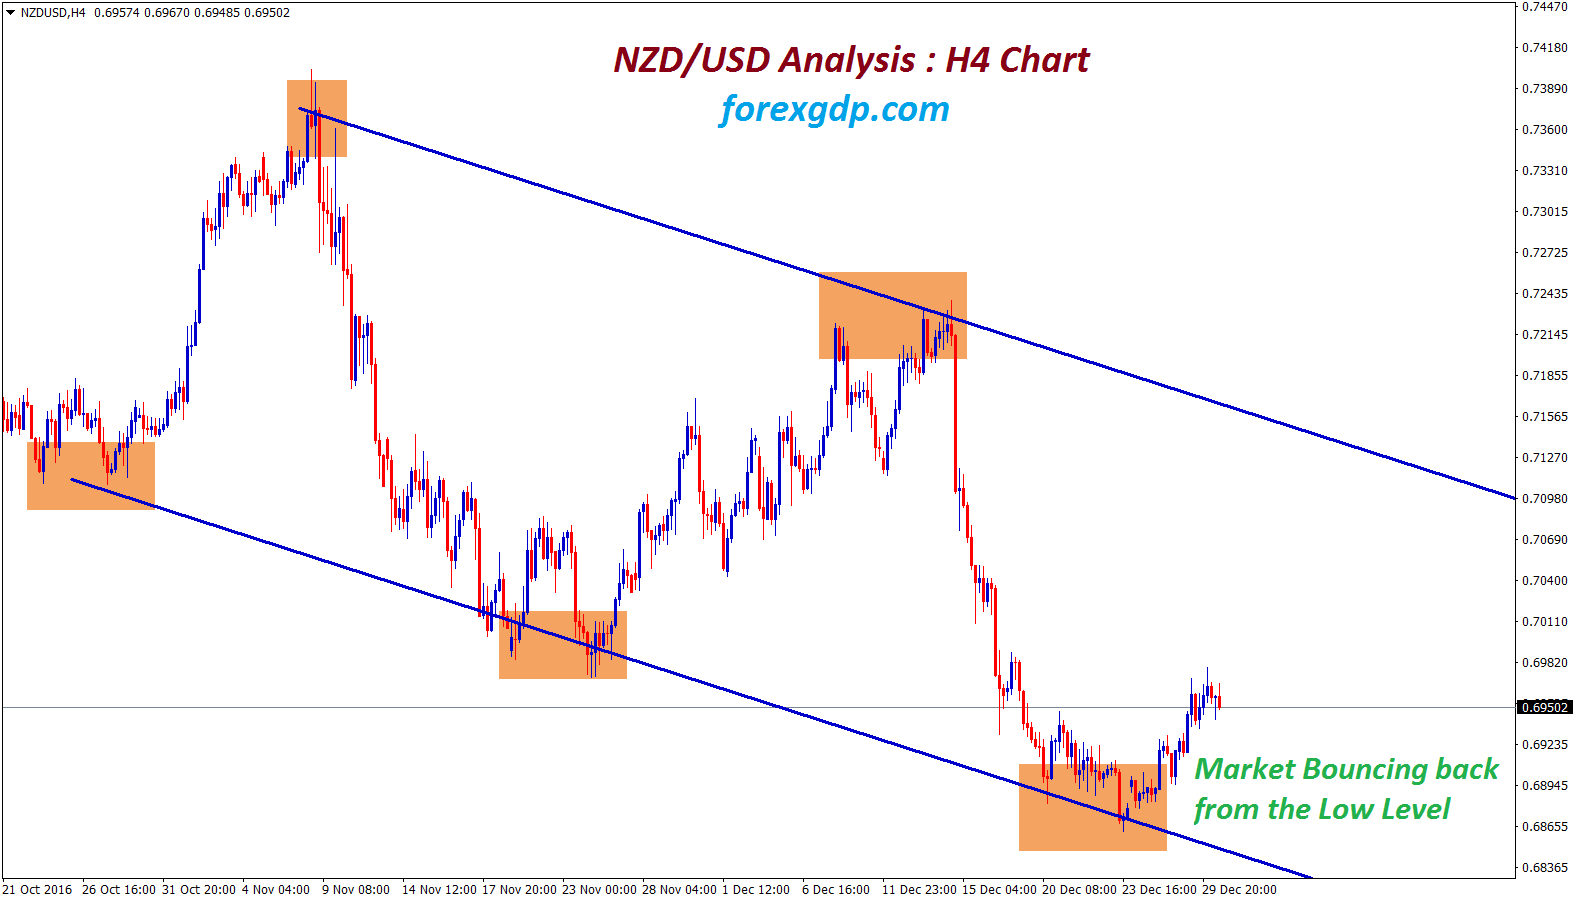 nzdusd market bouncing back from the low level at trend support